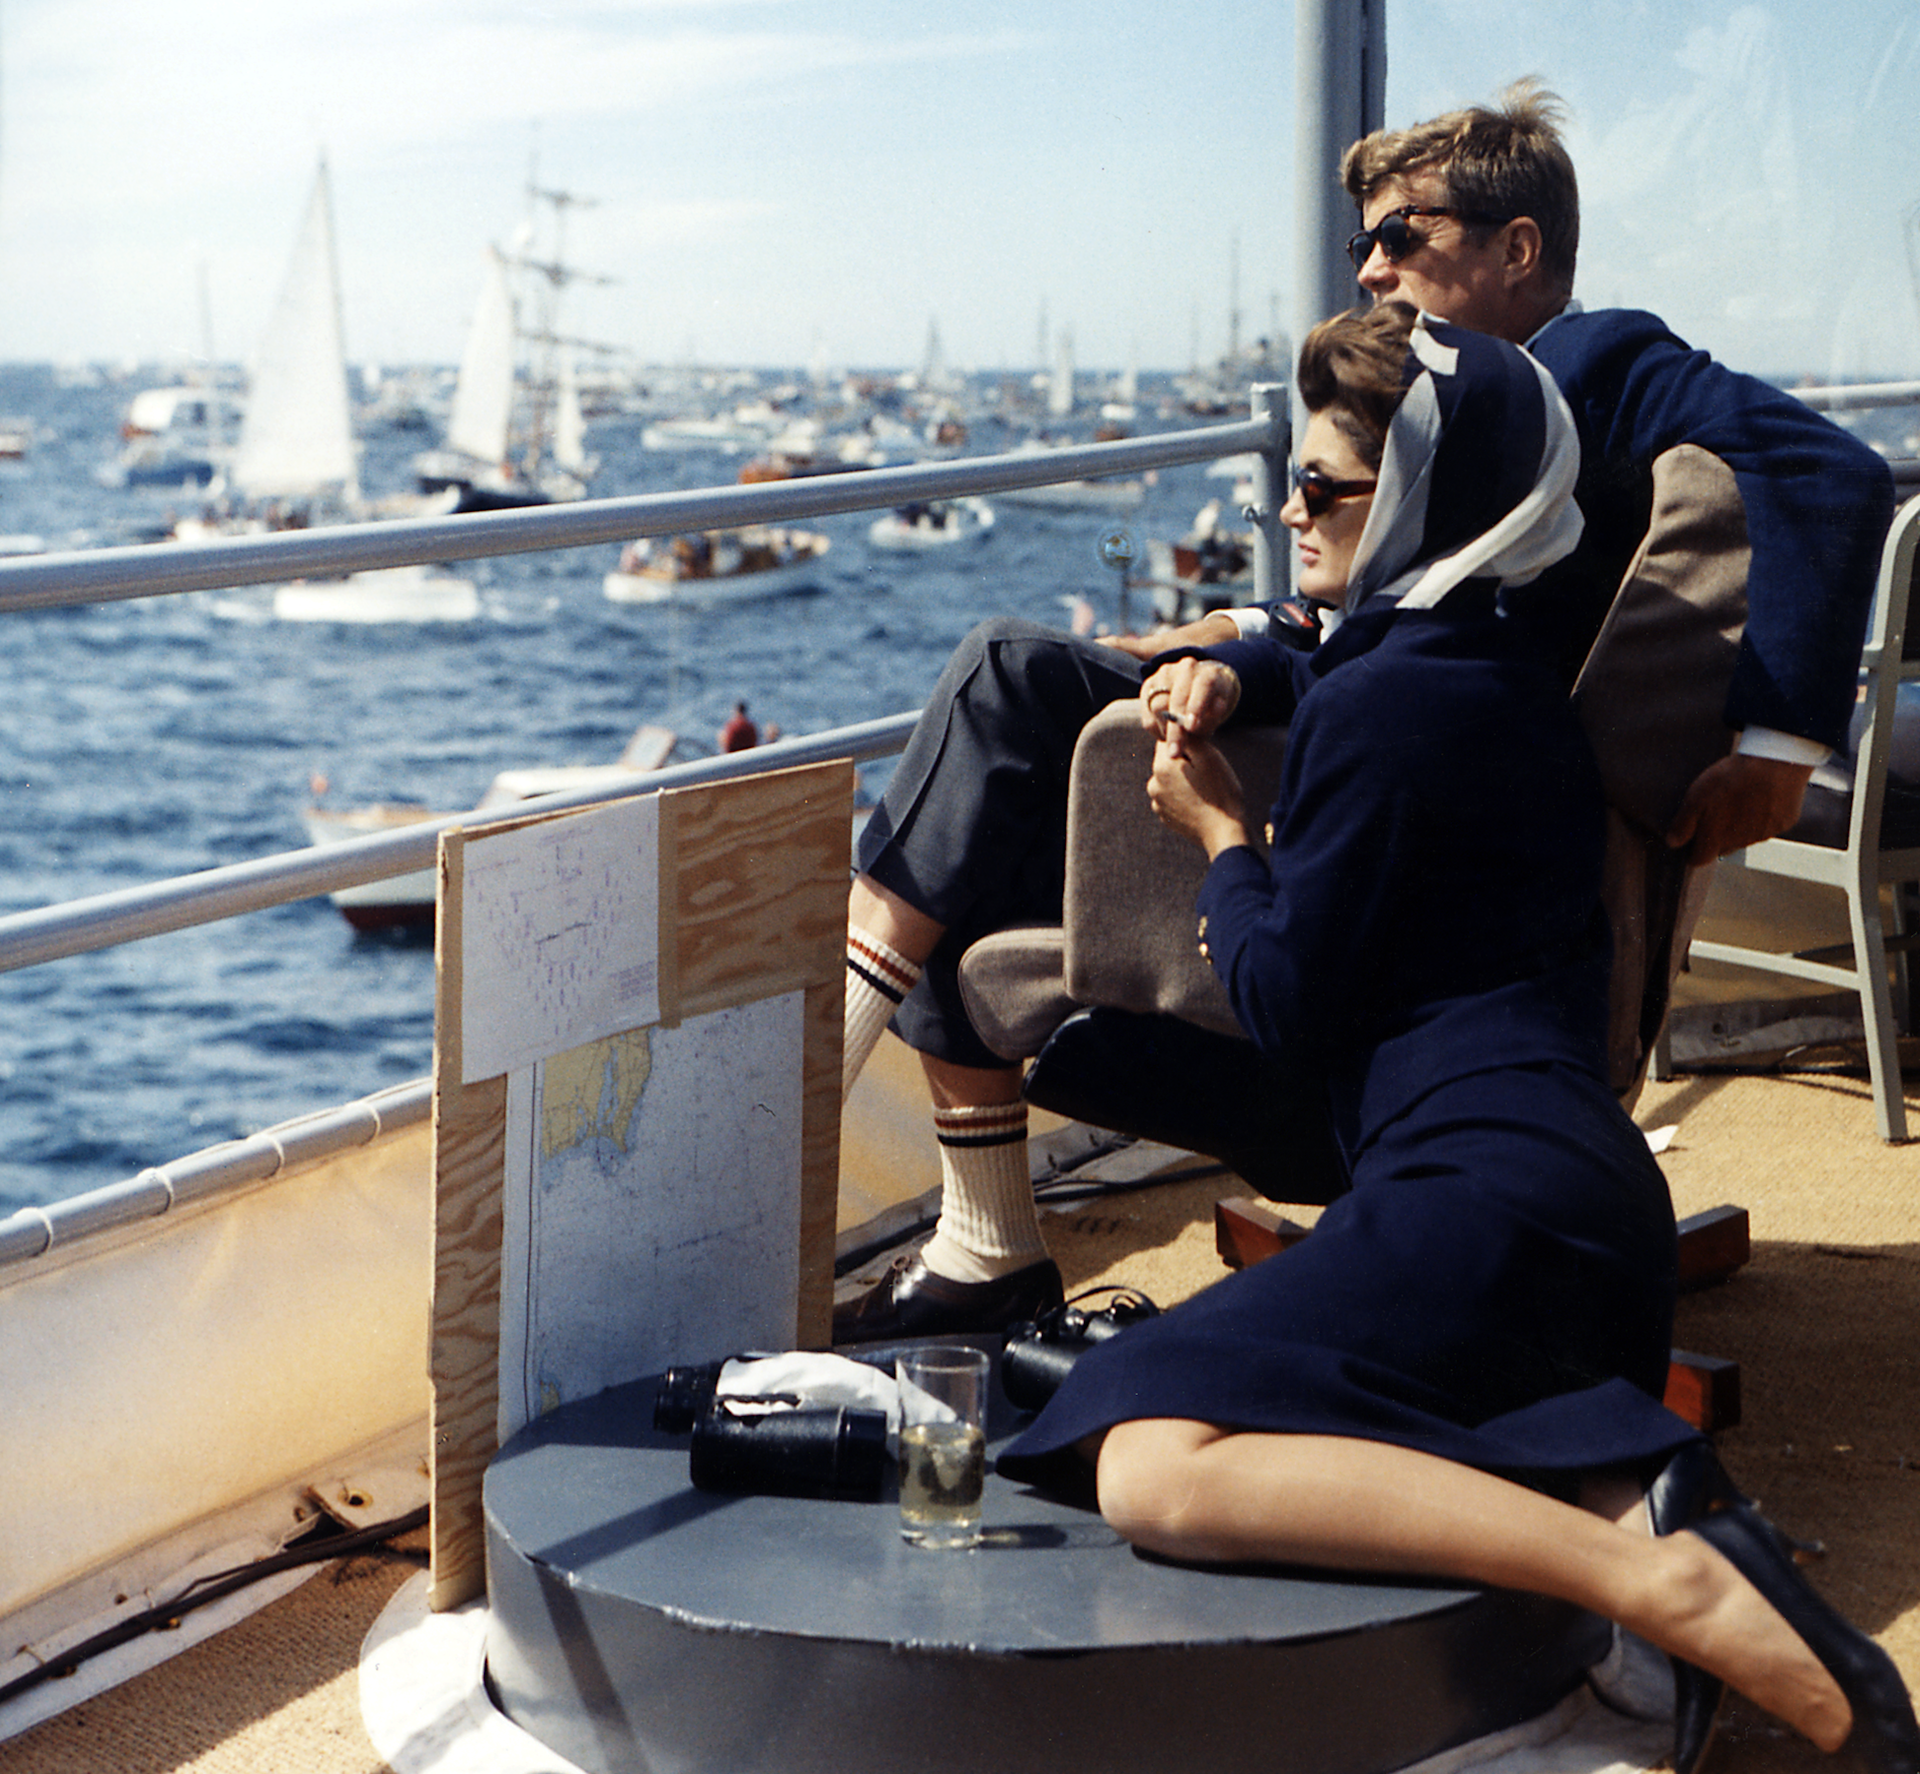 President_Kennedy_and_wife_watching_Americas_Cup,_1962